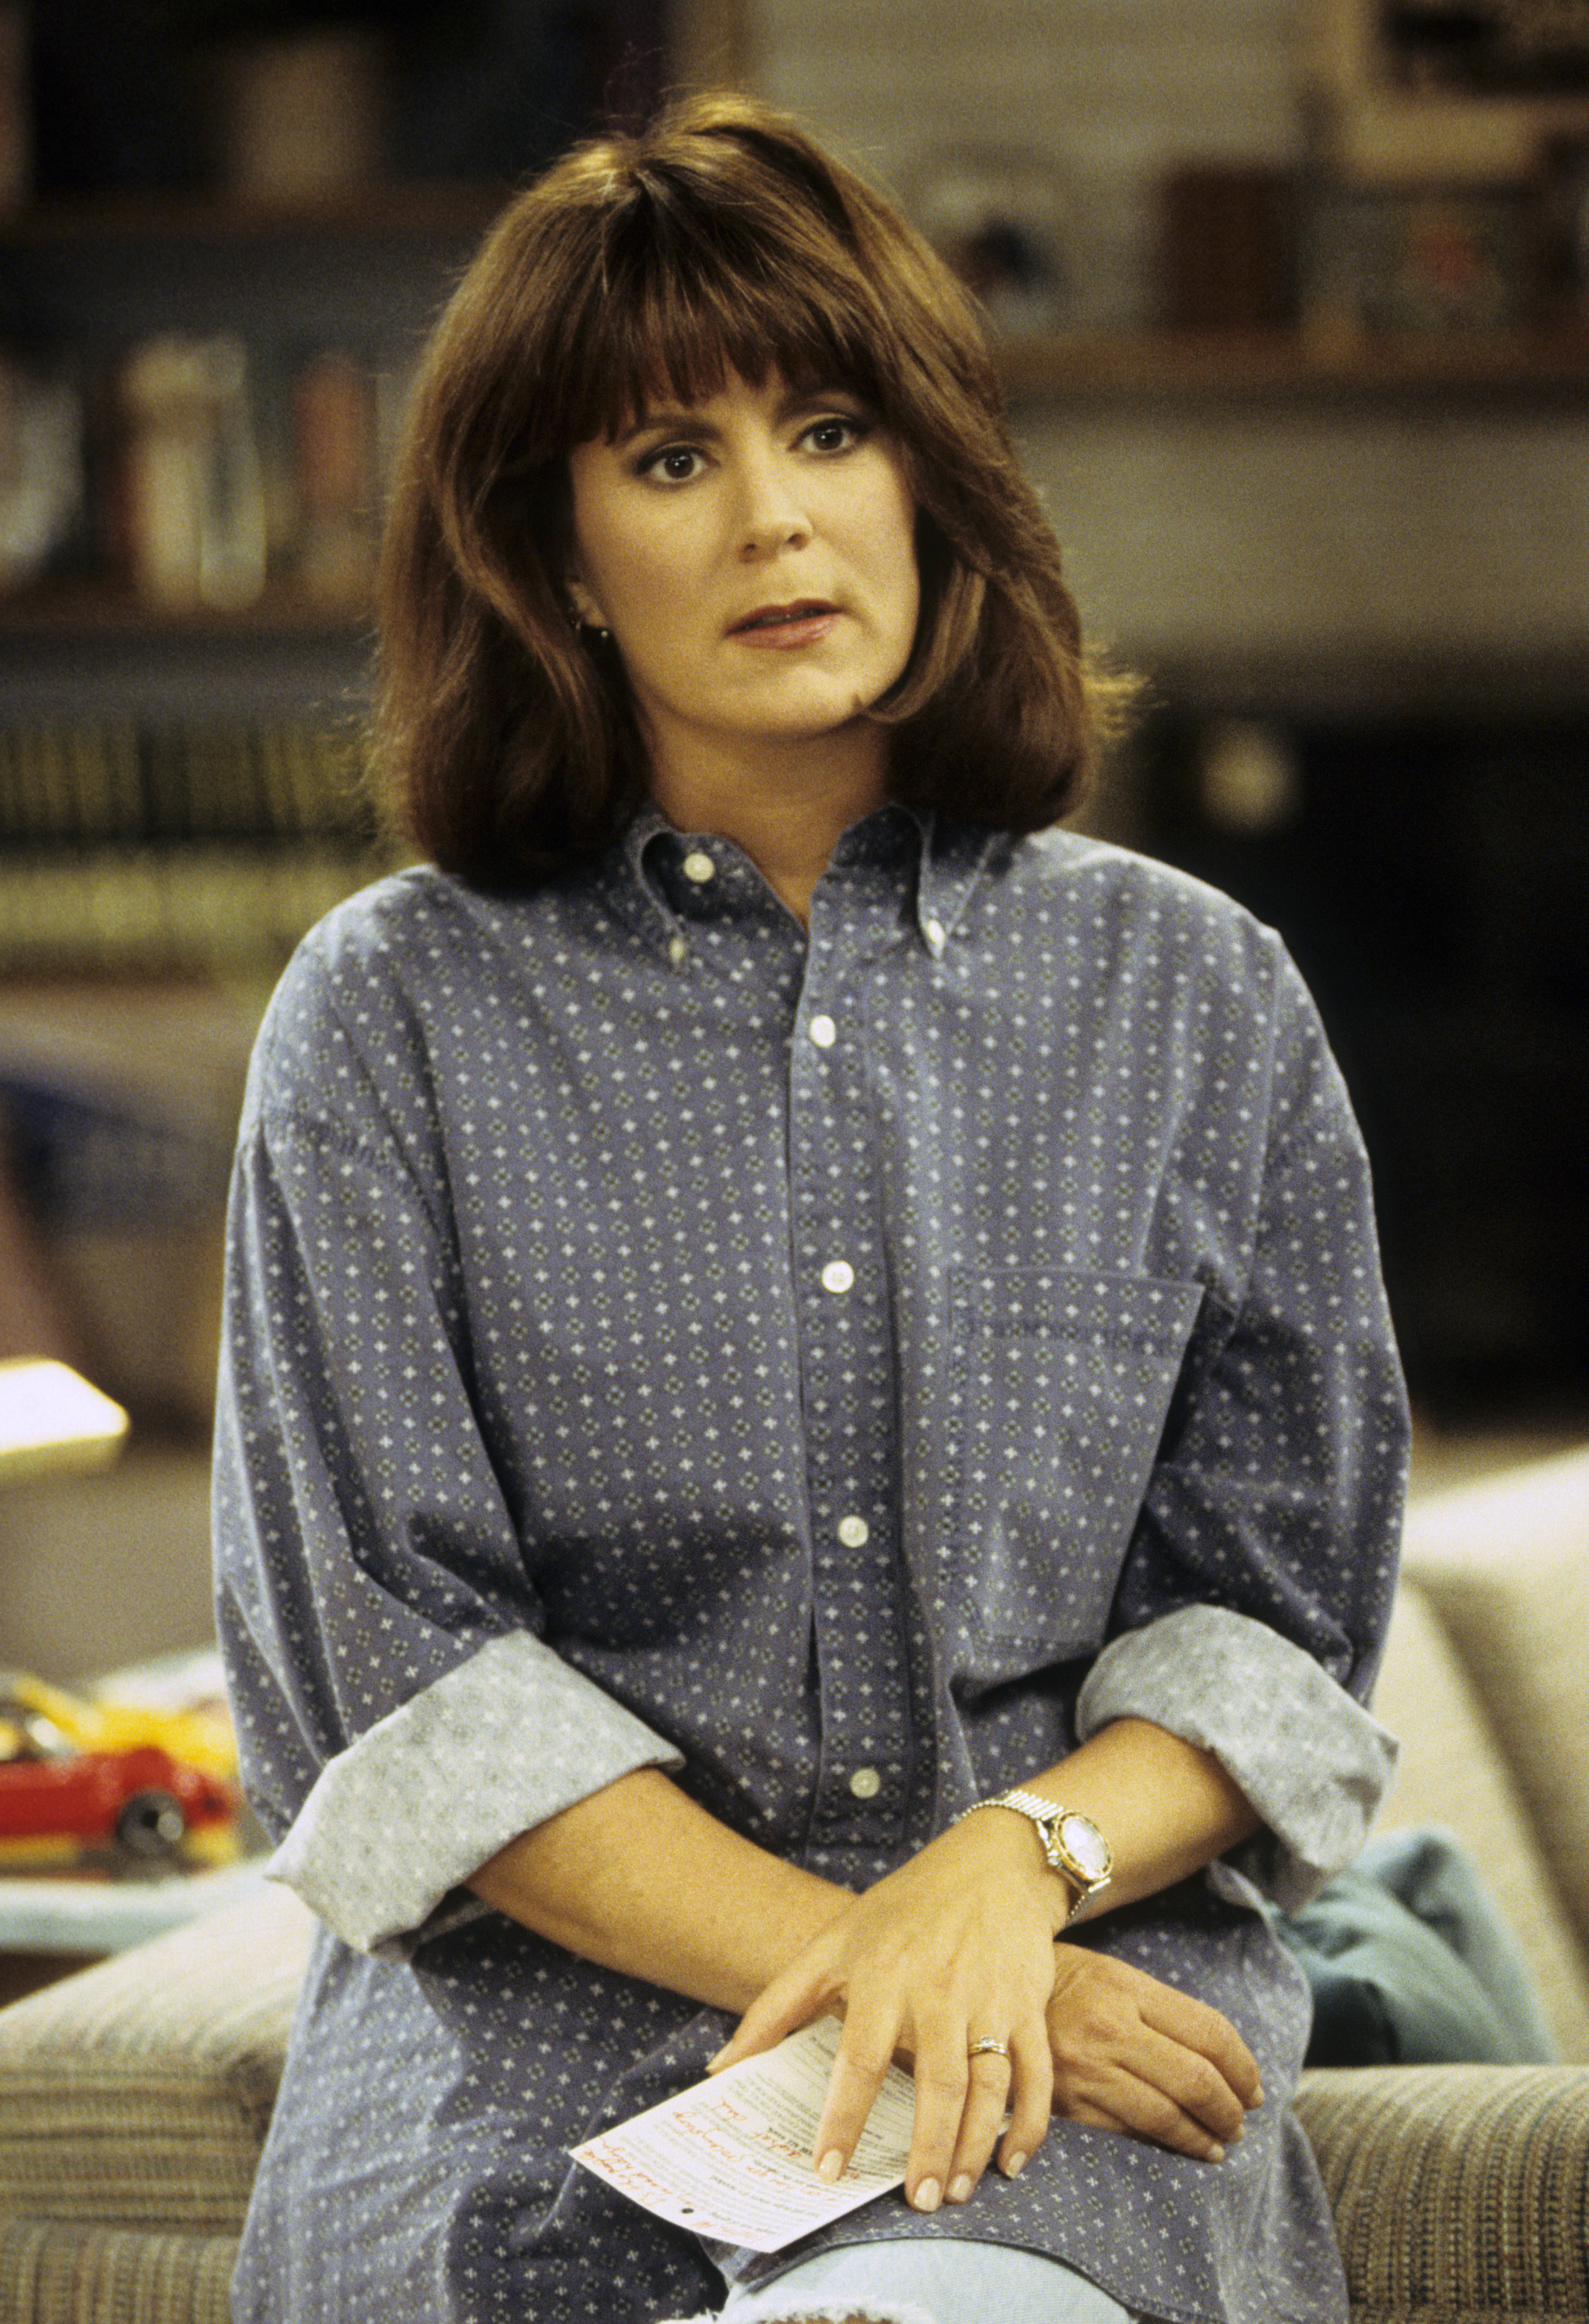 Patricia Richardson in "Home Improvement," October 6, 1993 | Source: Getty Images